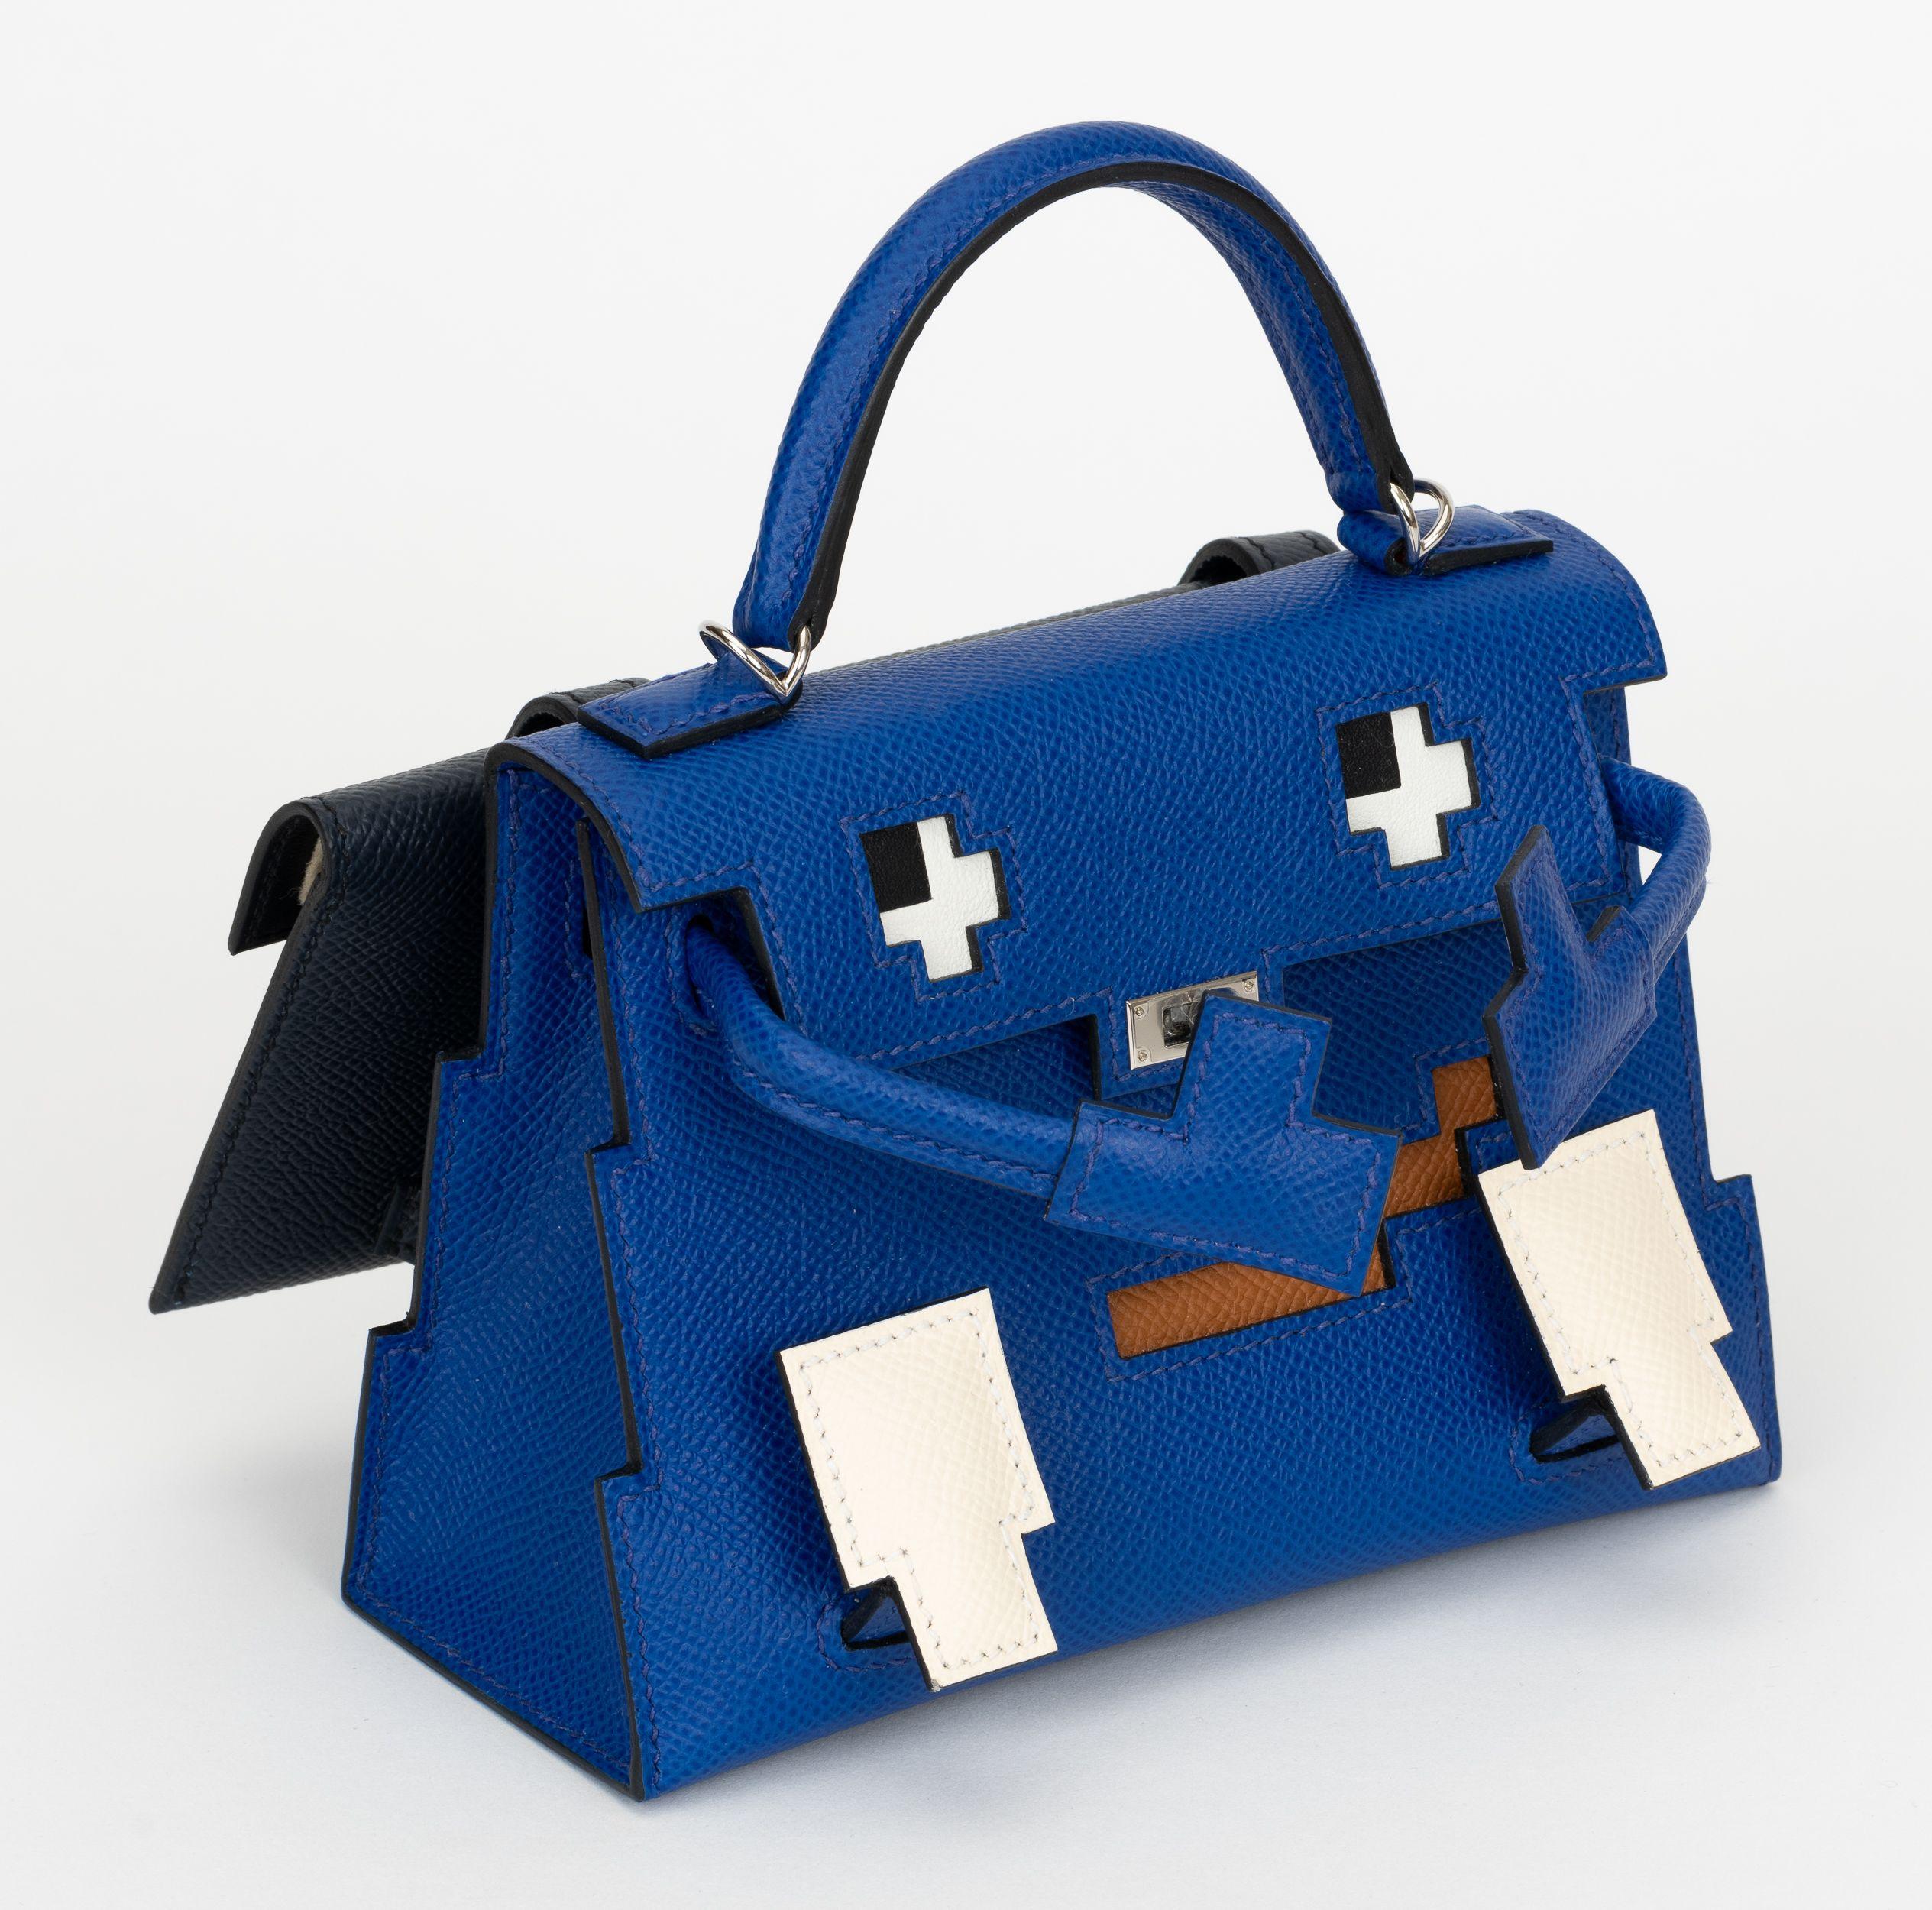 Hermès rare and collectible Kelly Idole Picto bag in blue royale, nata and gold epsom leather. Palladium hardware. Black leather for the funky detachable backpack that can fit a phone. Brand new with detachable shoulder strap, limited edition blue